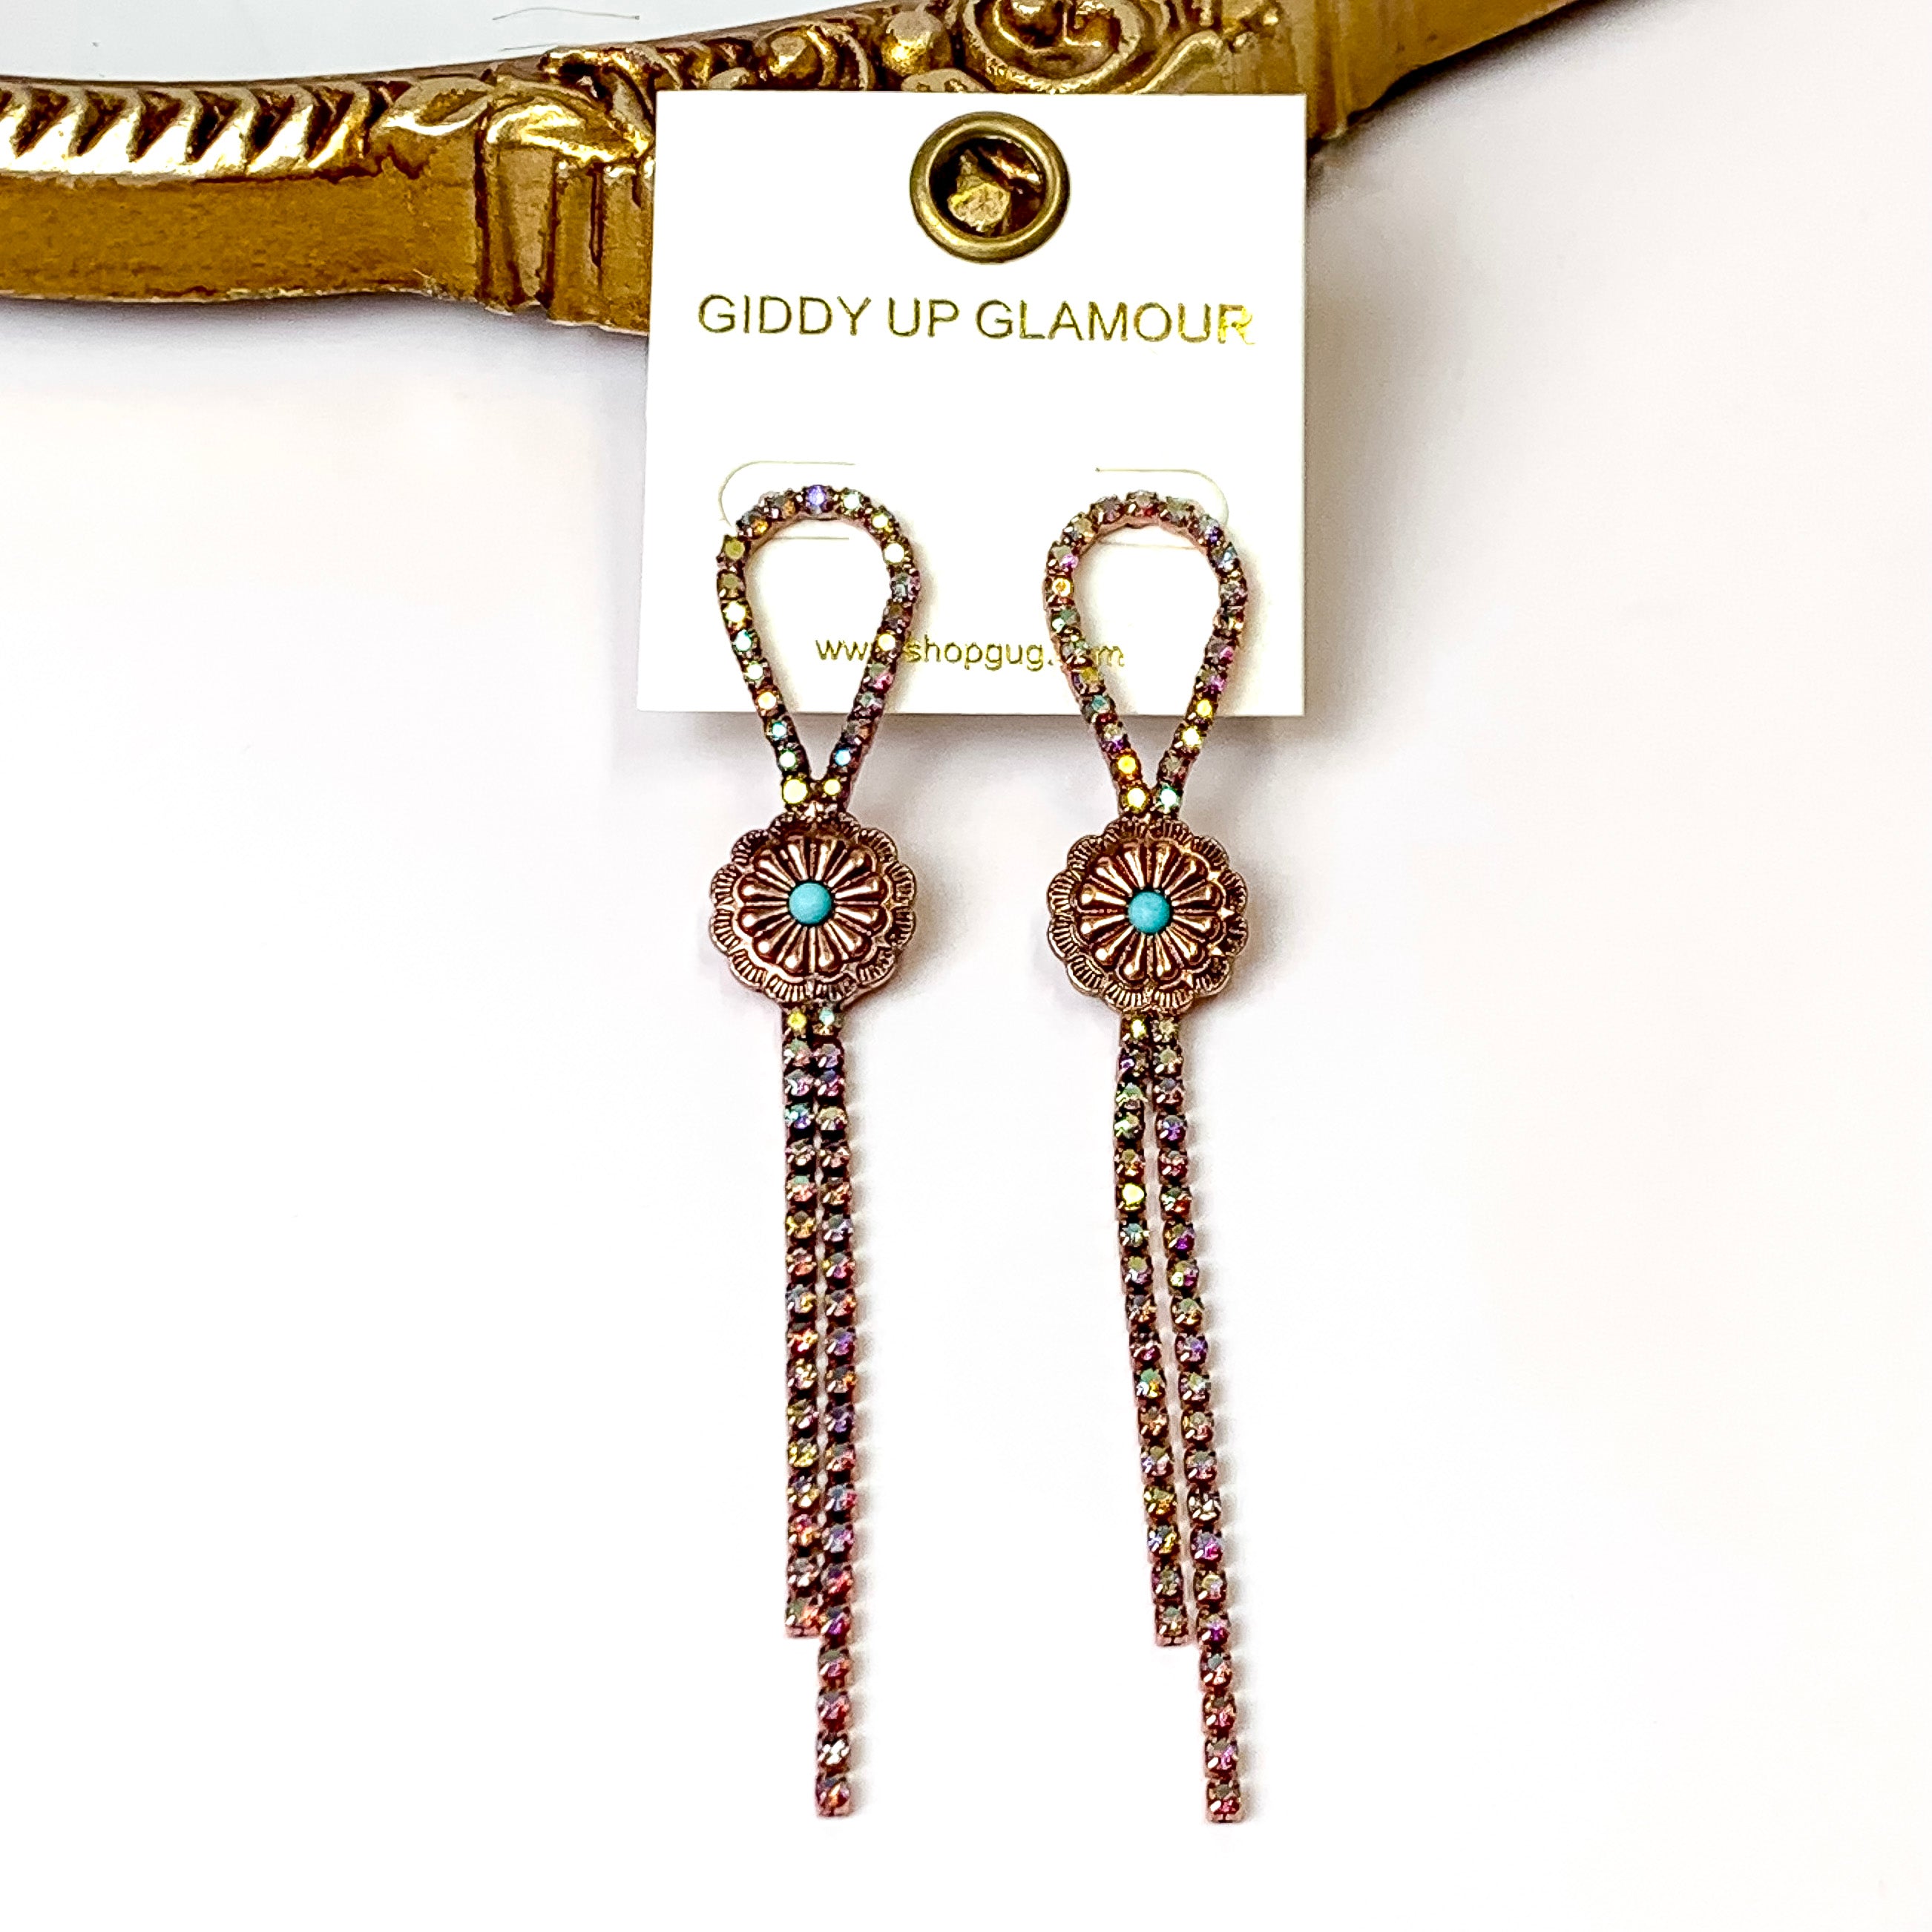 AB Crystal Bolo Tie Tassel Earrings with Circle Concho in Copper Tone